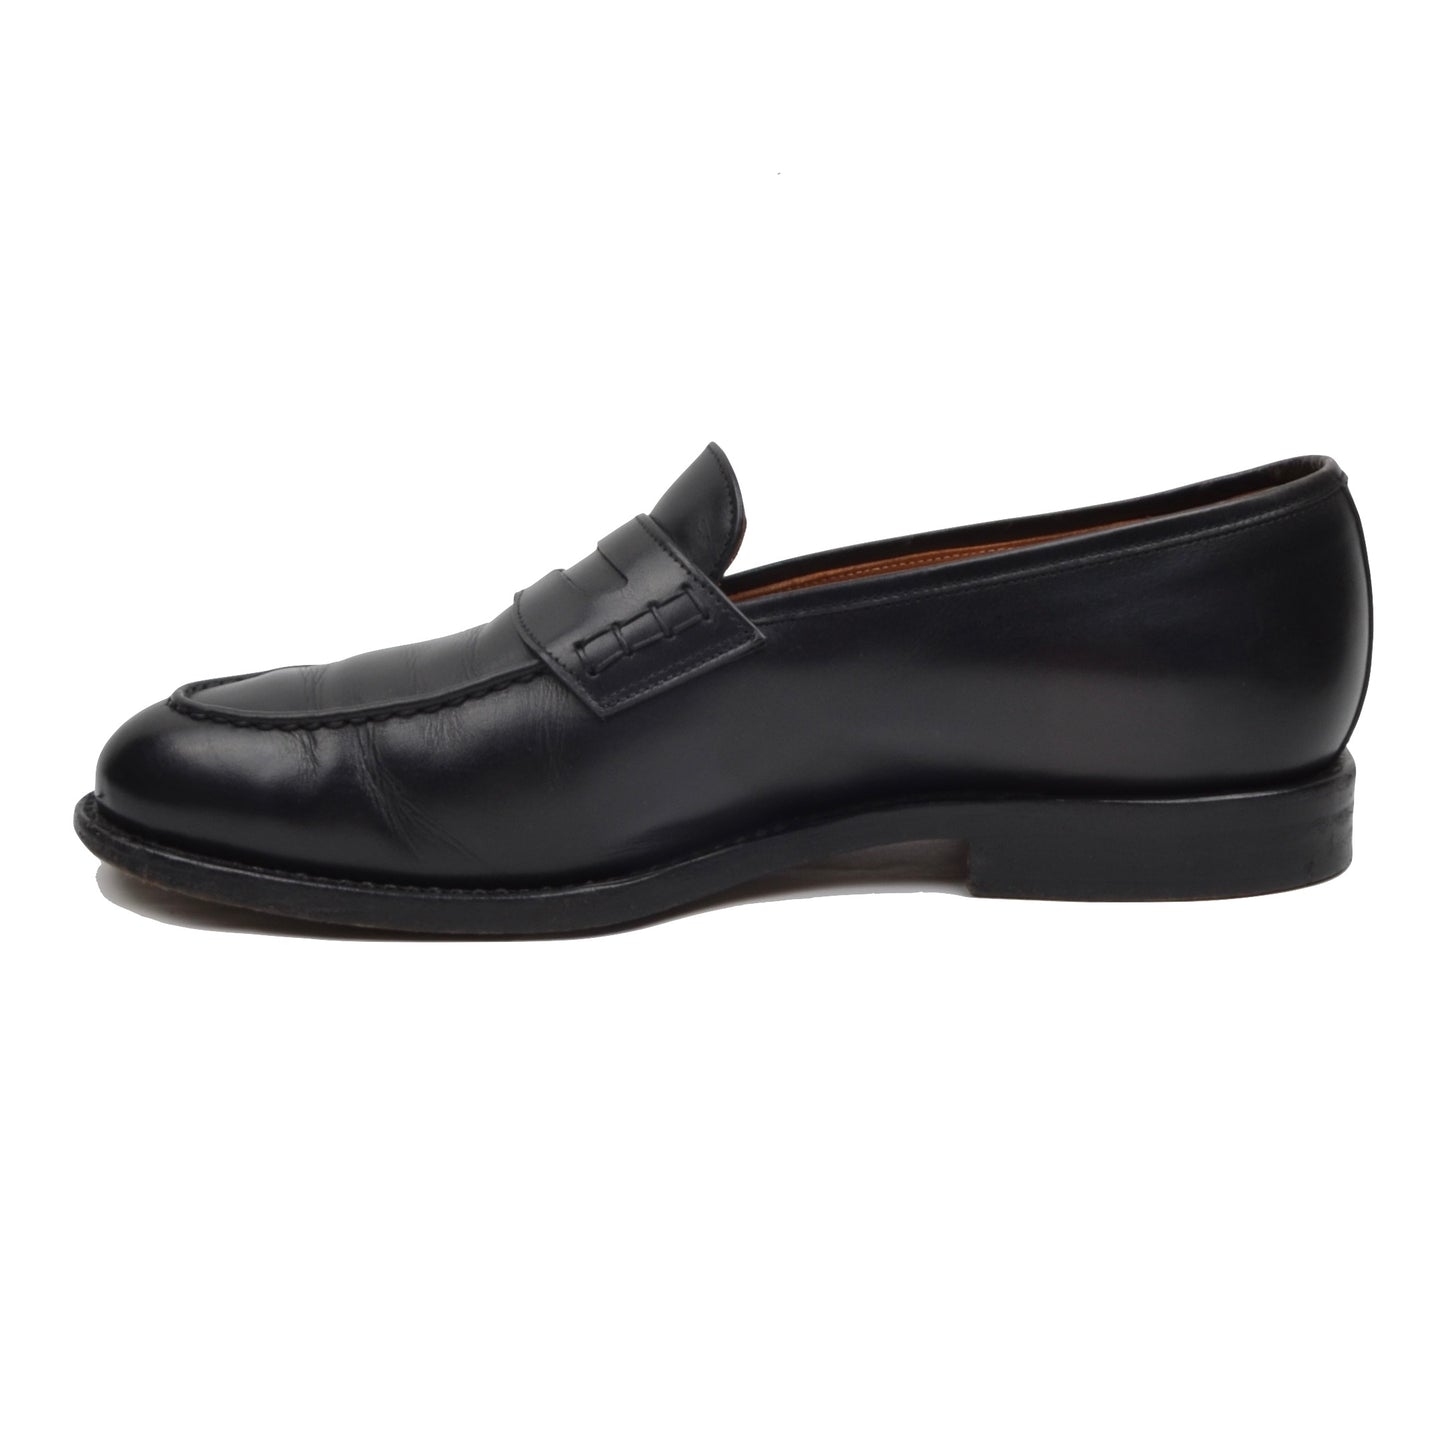 Ludwig Reiter Penny Loafer Shoes Size 7 - Black